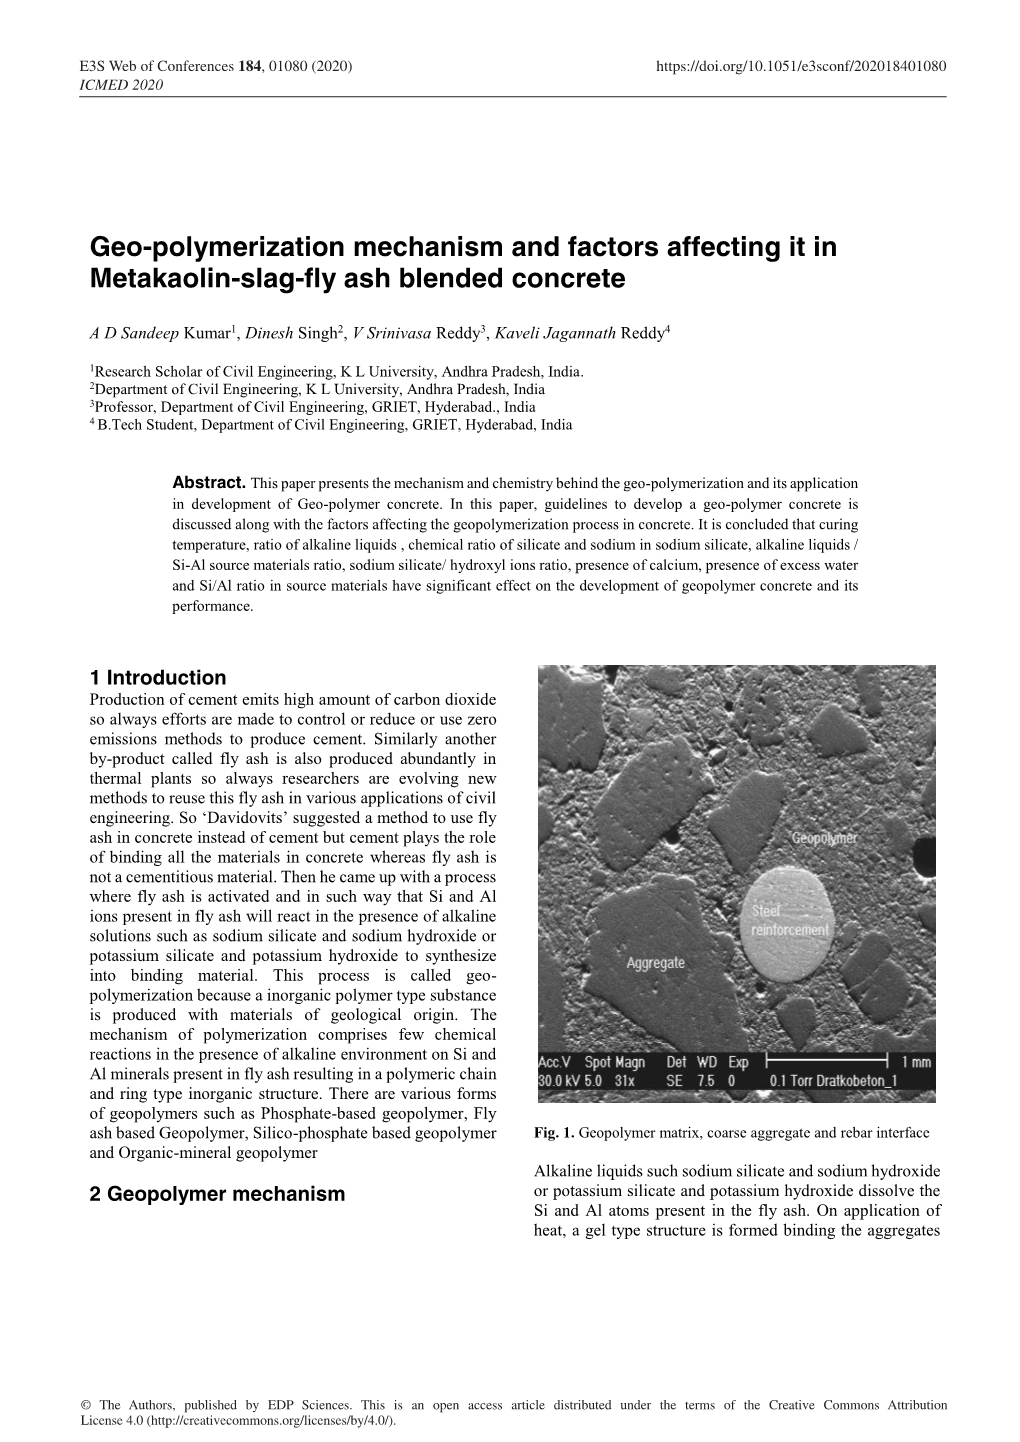 Geo-Polymerization Mechanism and Factors Affecting It in Metakaolin-Slag-Fly Ash Blended Concrete